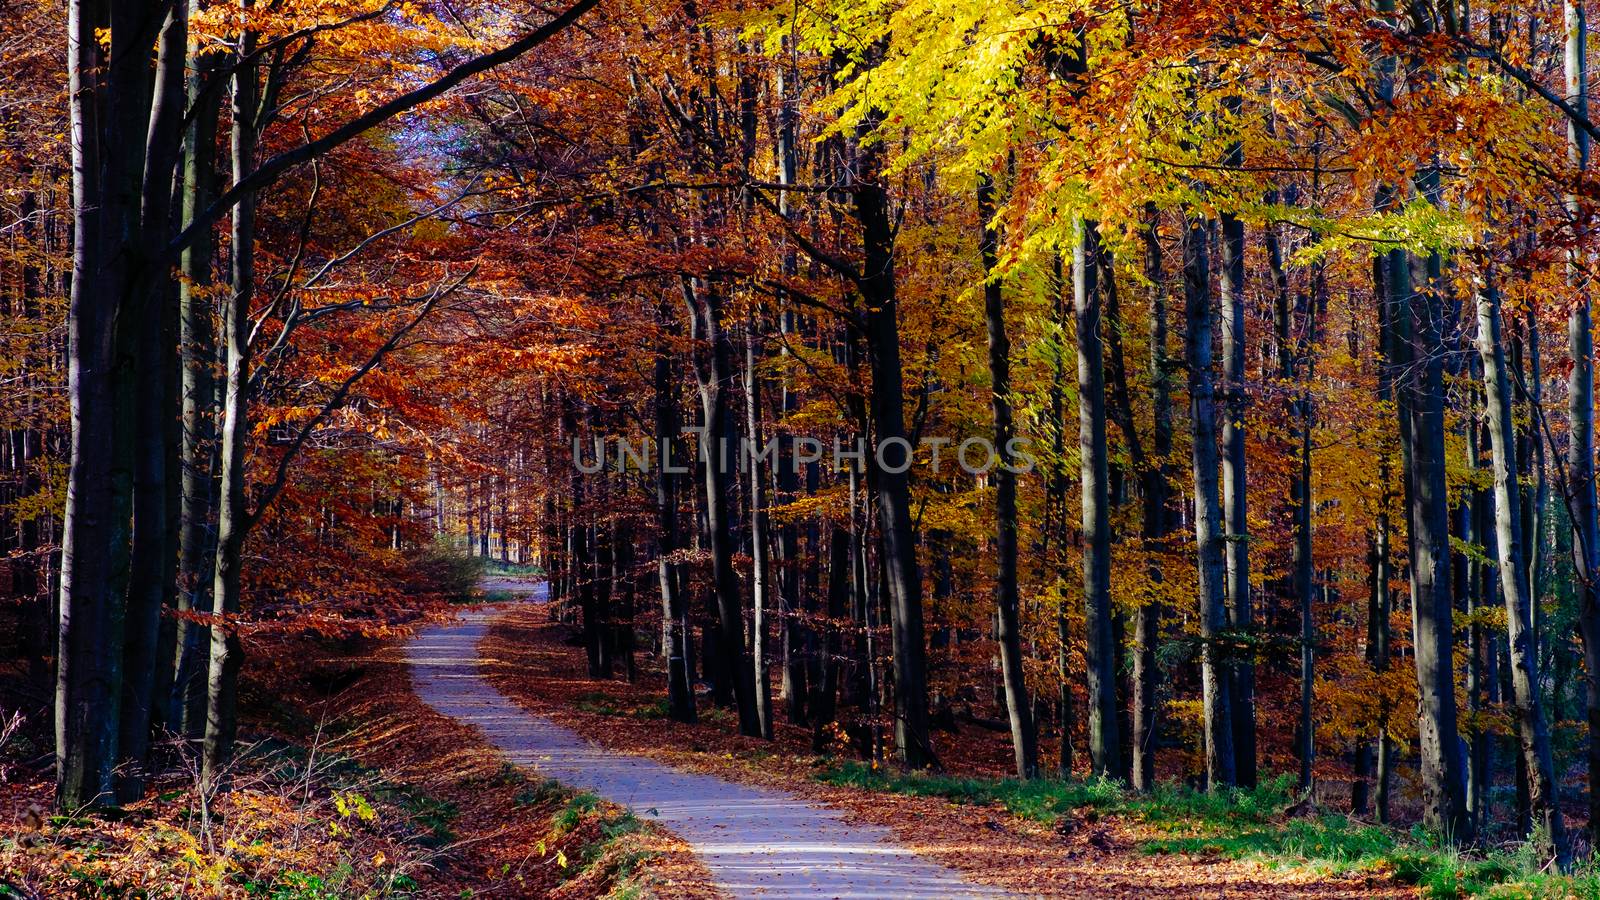 Landscape view of autumn forest colorful foliage and road by martinm303